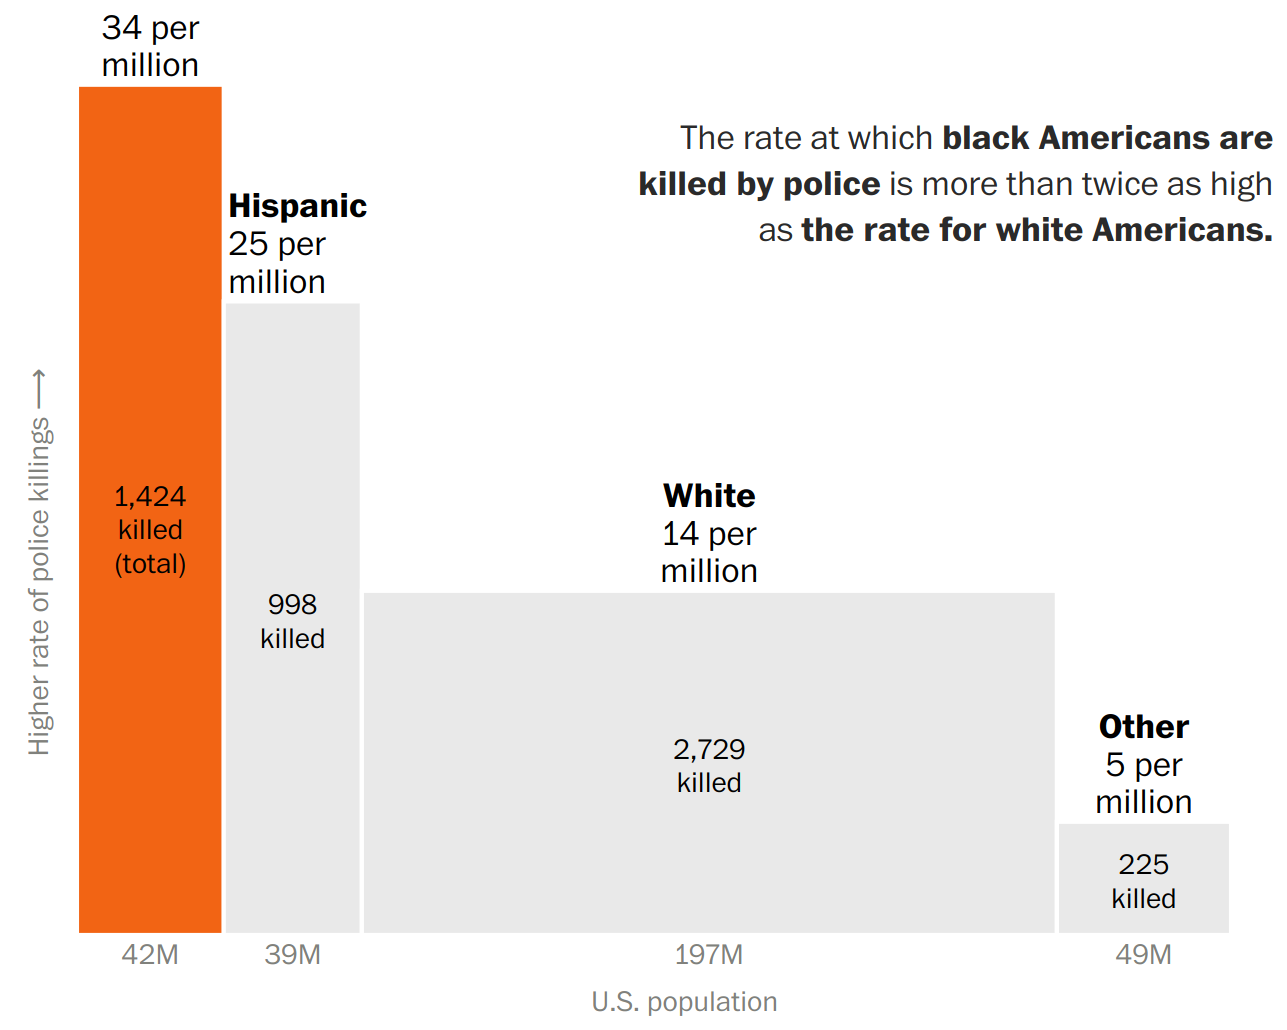 A data visualization about the incidence of police shootings by race